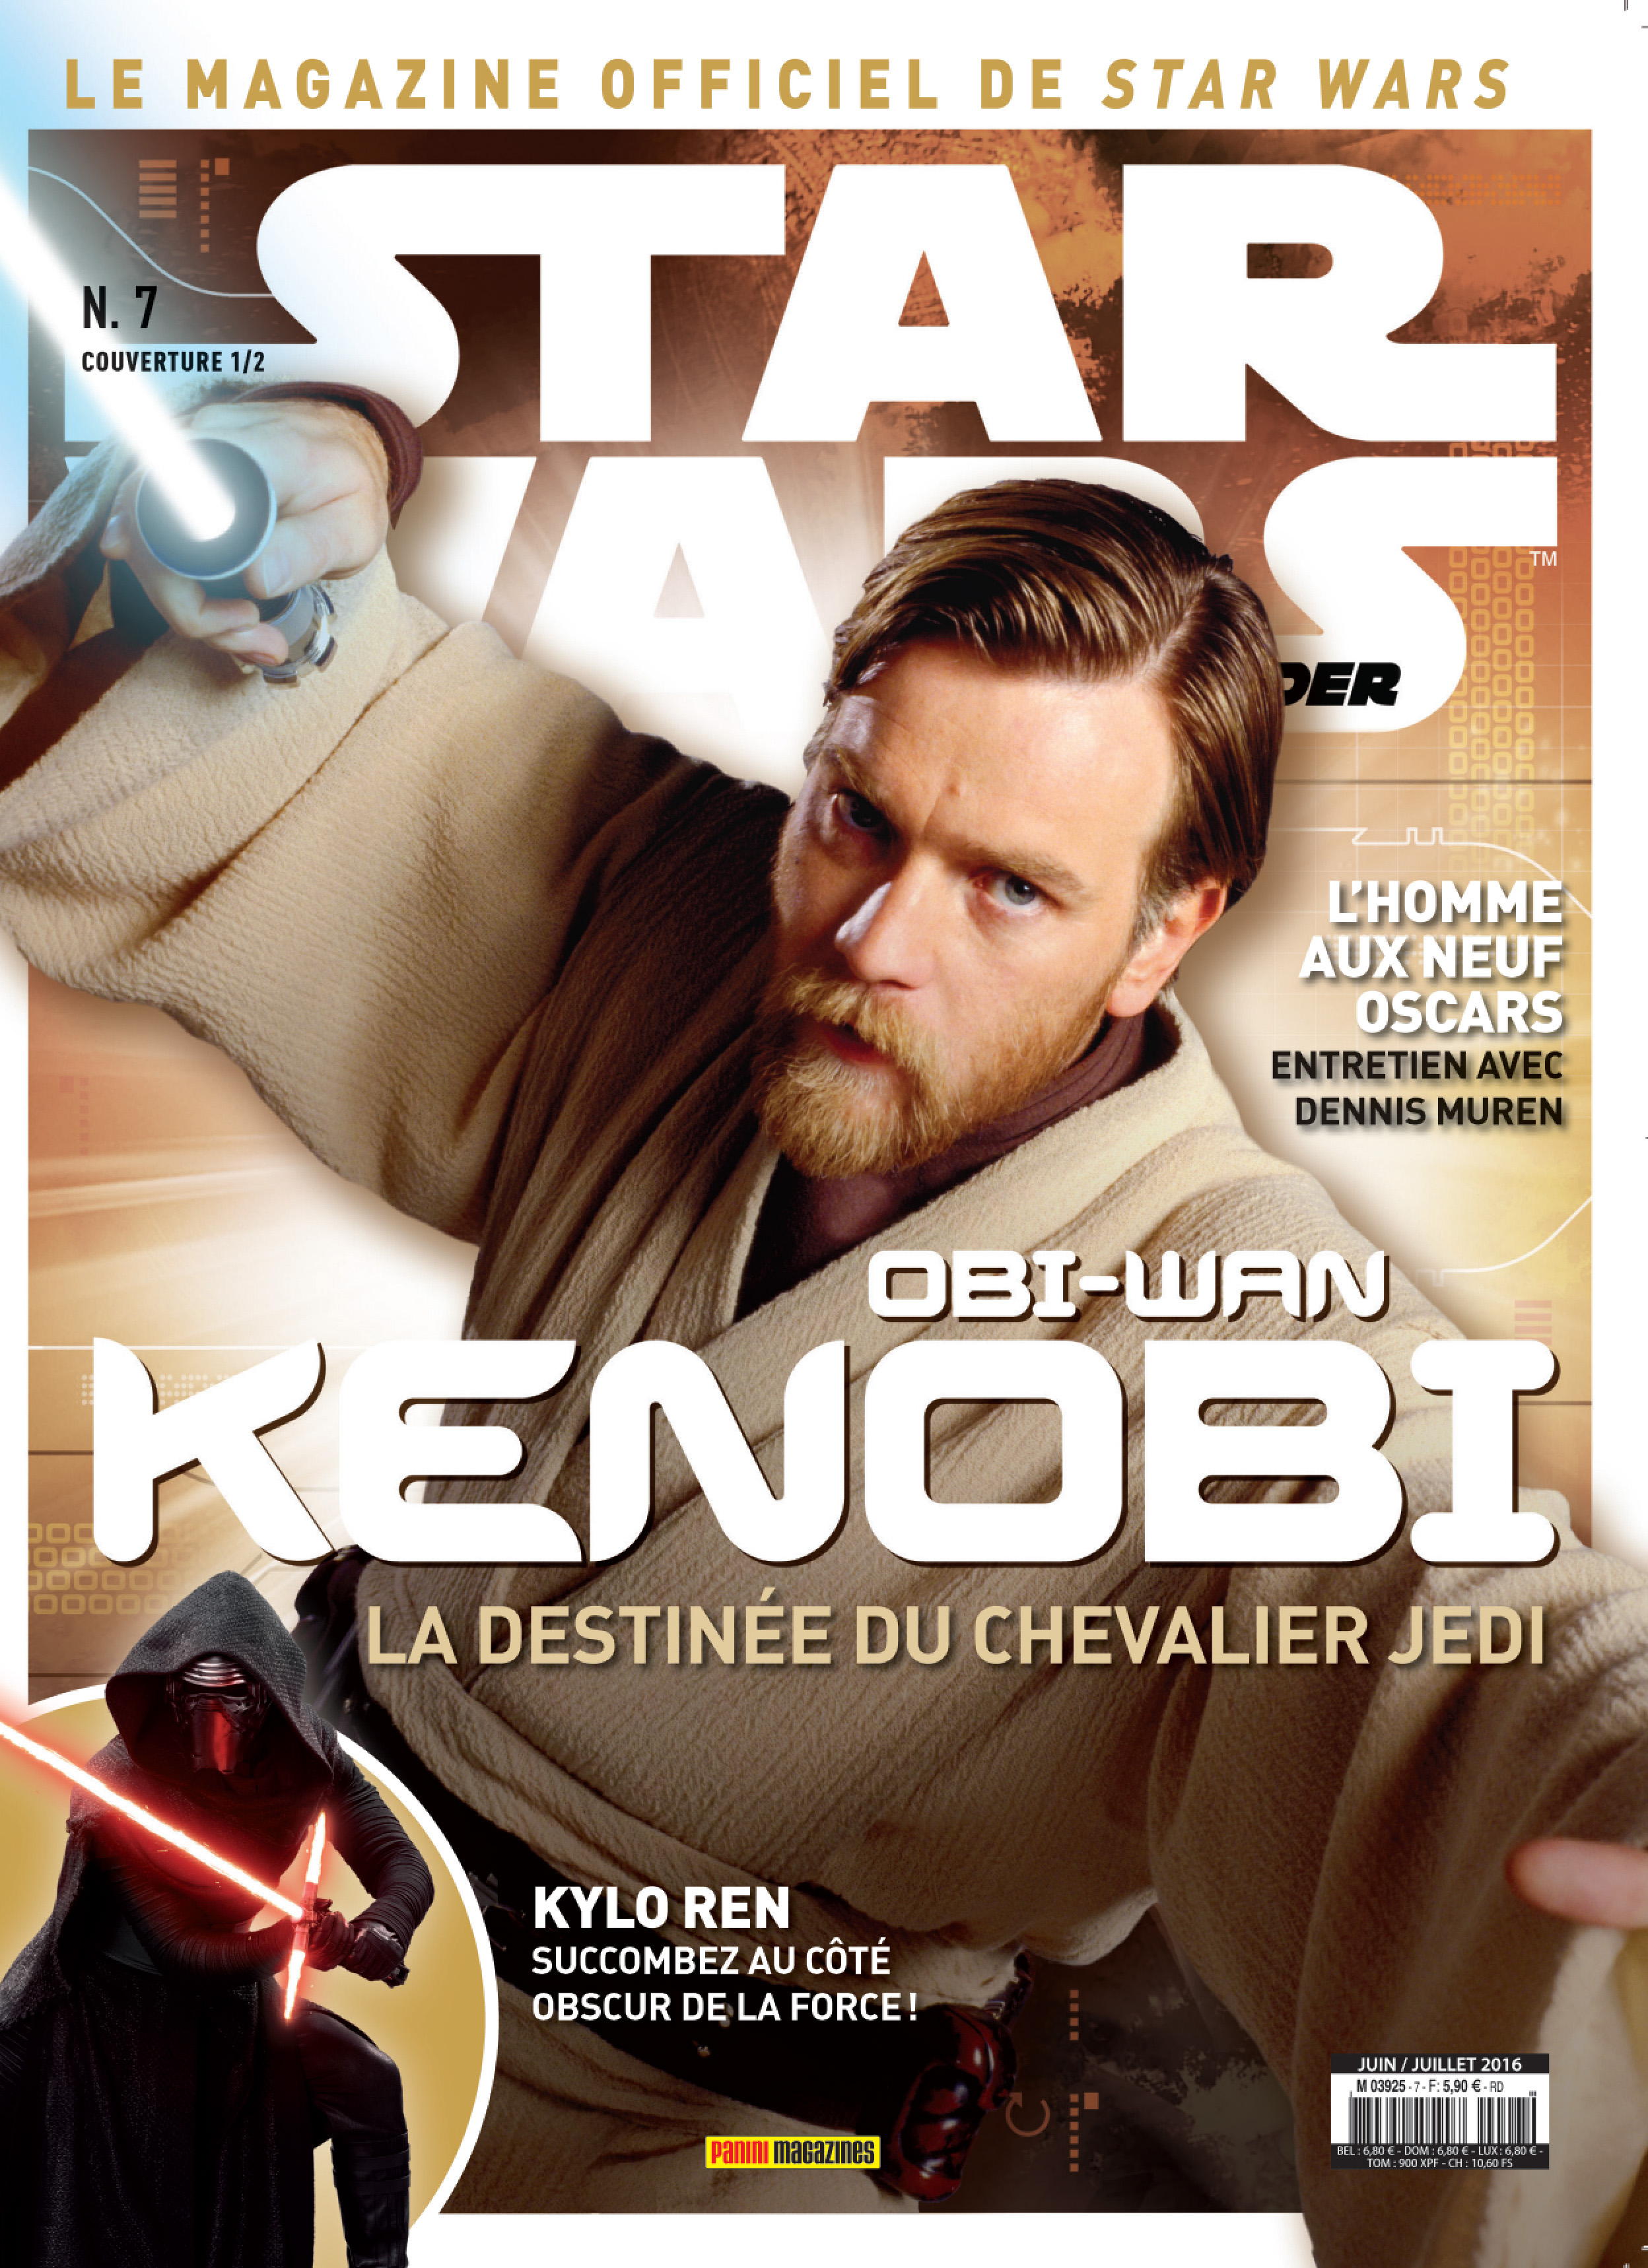 Star Wars Insider 7 - Couverture A